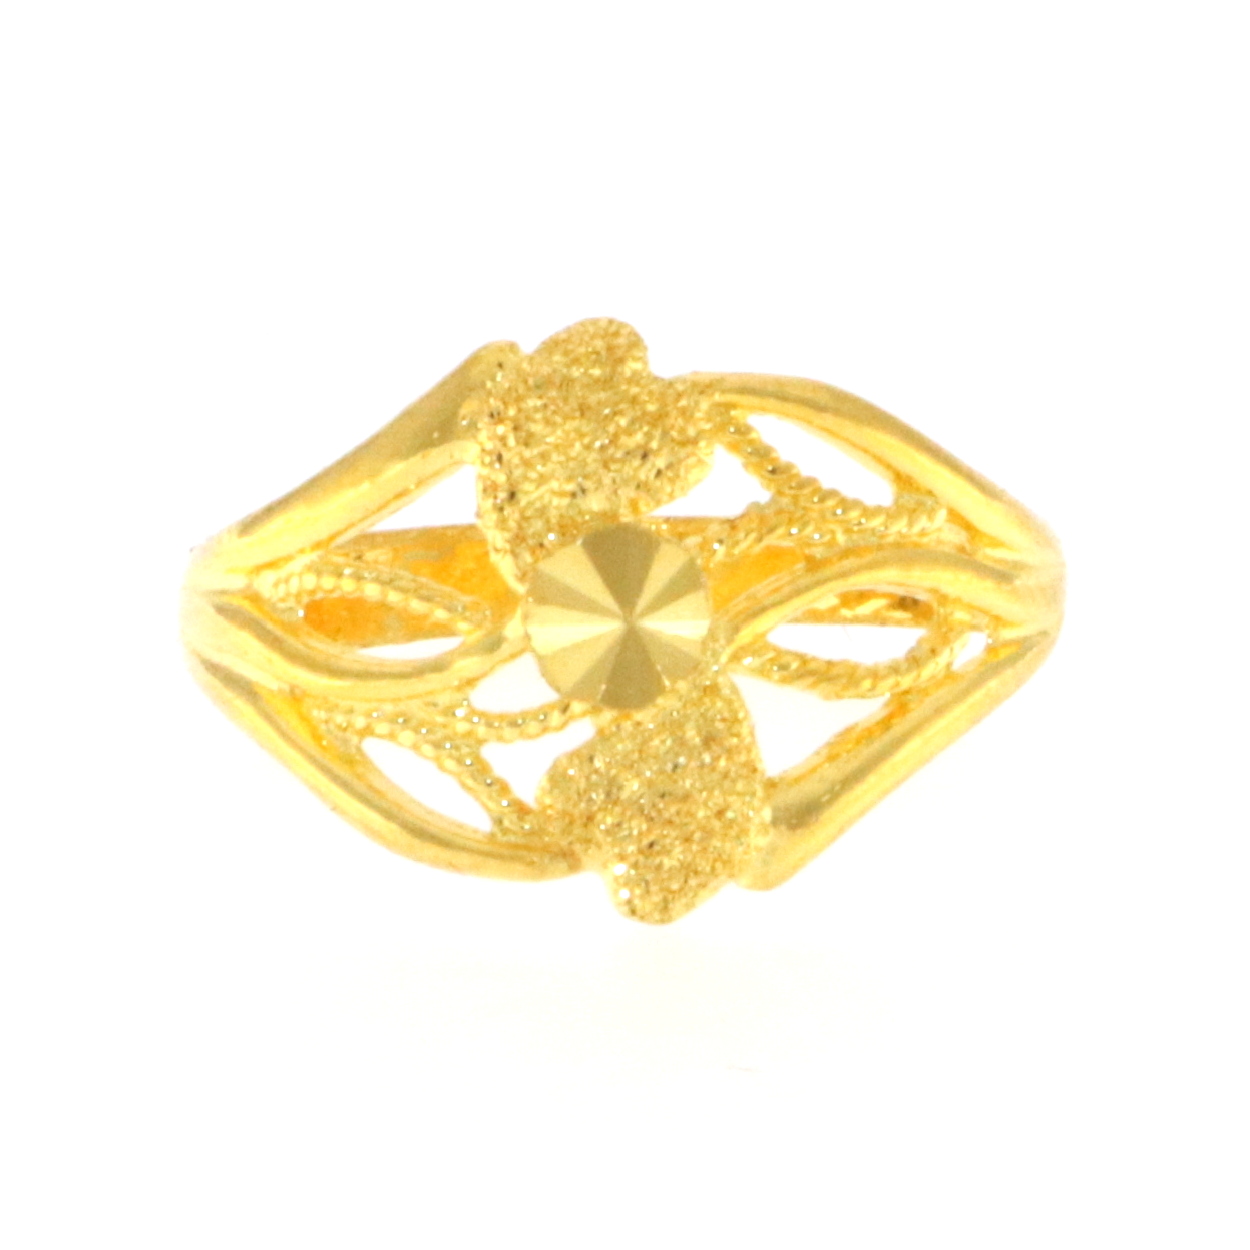 22ct Gold Ladies Hearts Ring